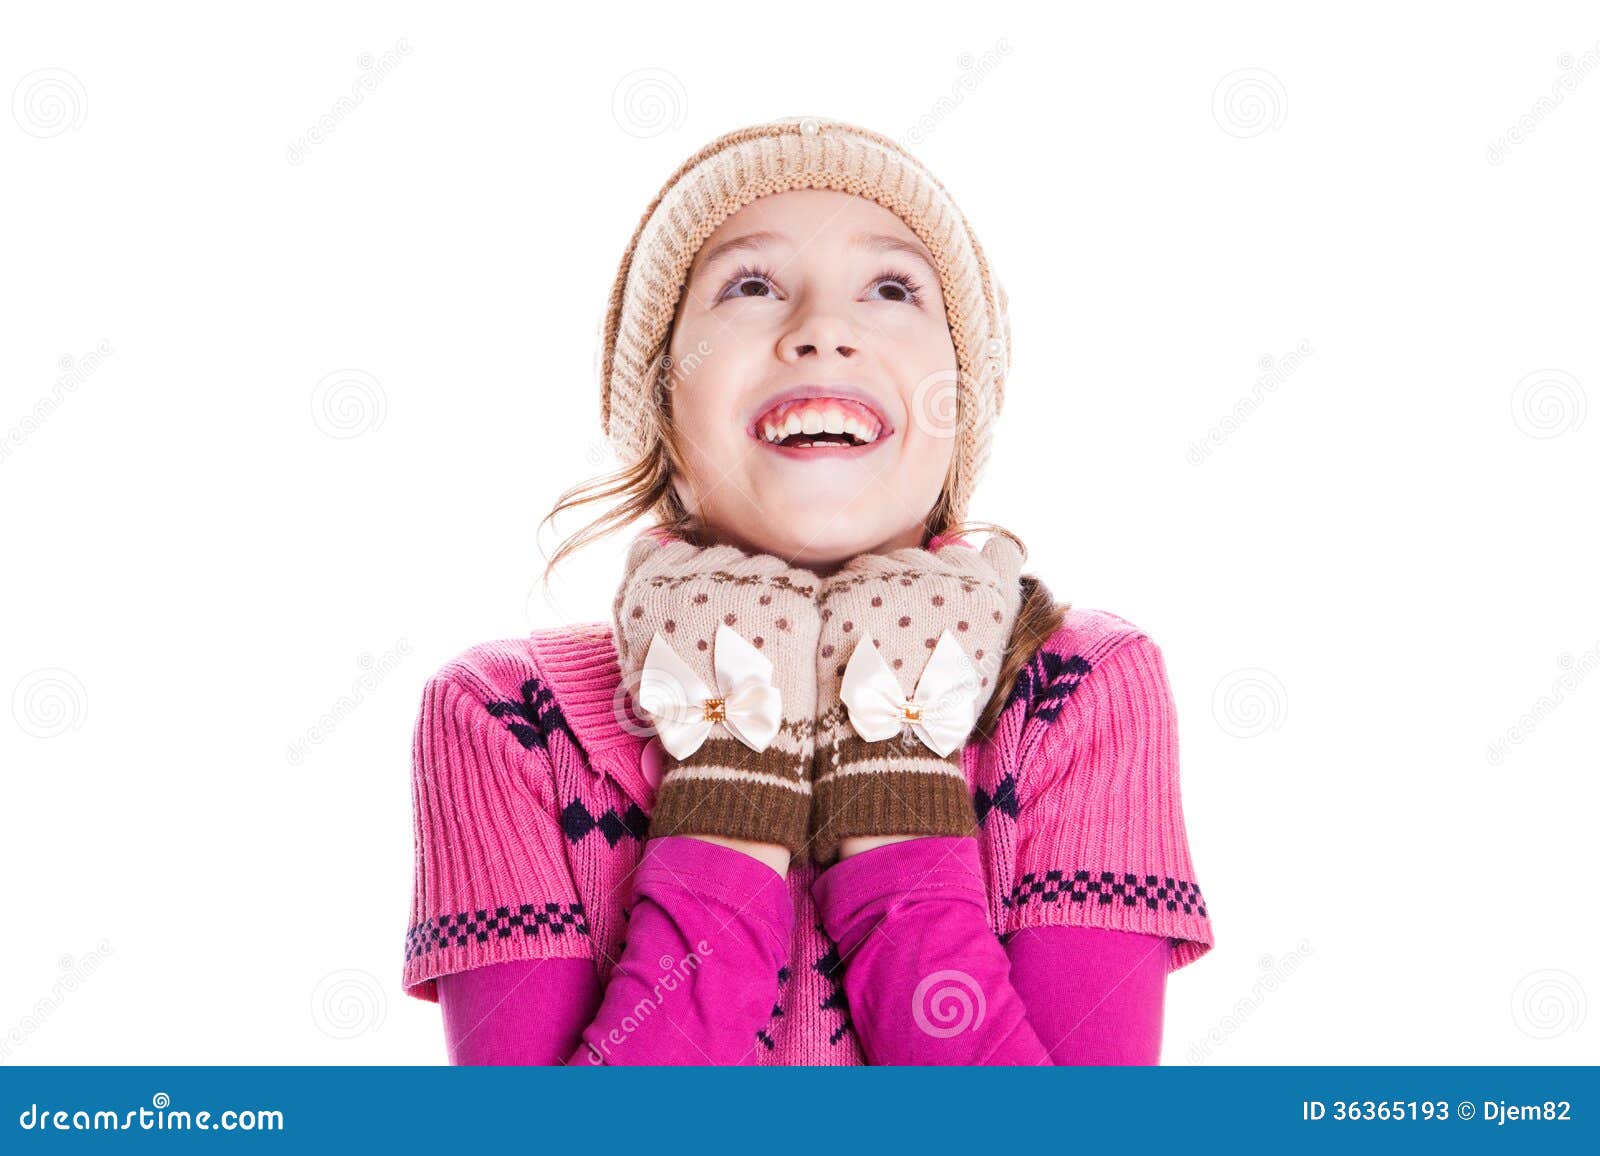 Portrait Of Cute Little Girl Looking Up Stock Photos - Image: 36365193